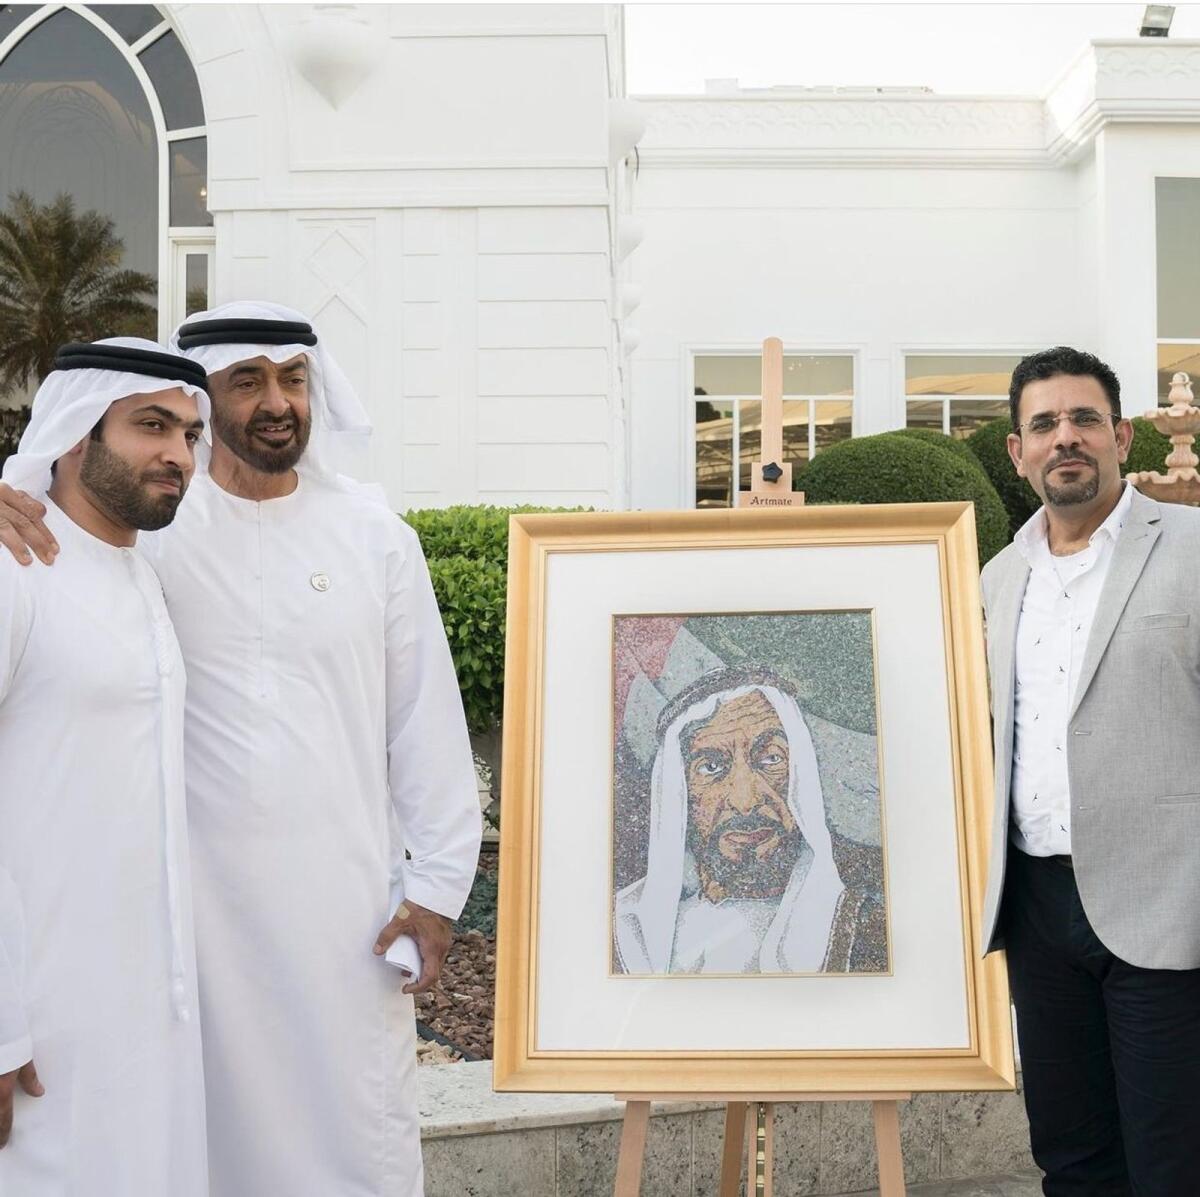 Sheikh Mohamed with Mohammed Abdullatif Galadari, co-chairman of Galadari Brothers, and KT illustrator Emadeldin Abdelsalam when they presented him with a portrait.